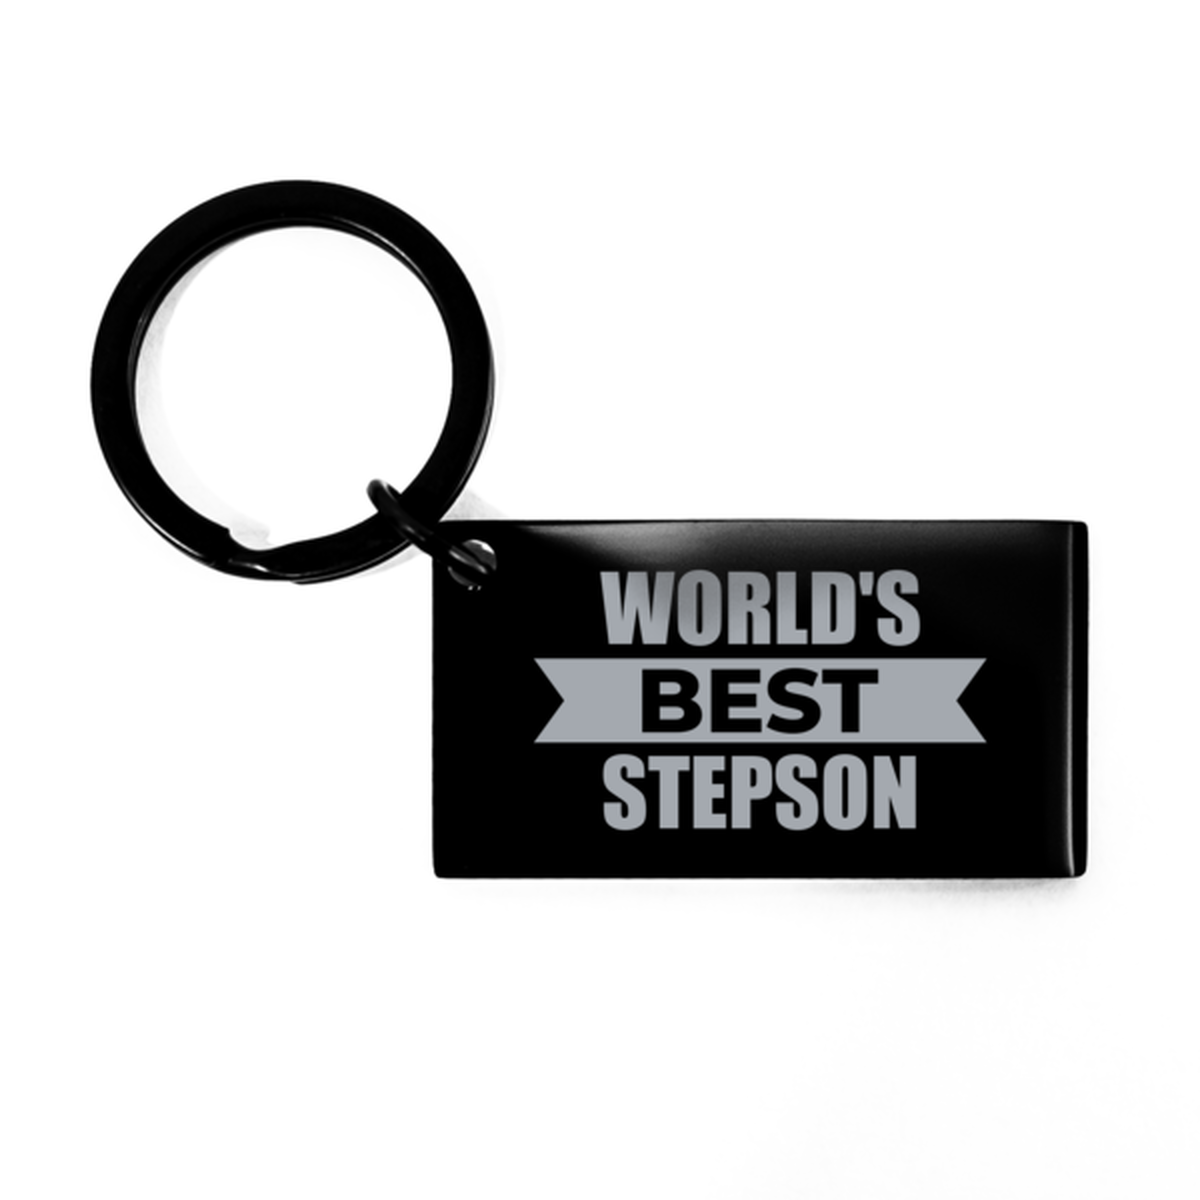 Worlds Best Stepson Gifts, Funny Black Engraved Keychain For Stepson, Birthday Presents For Men